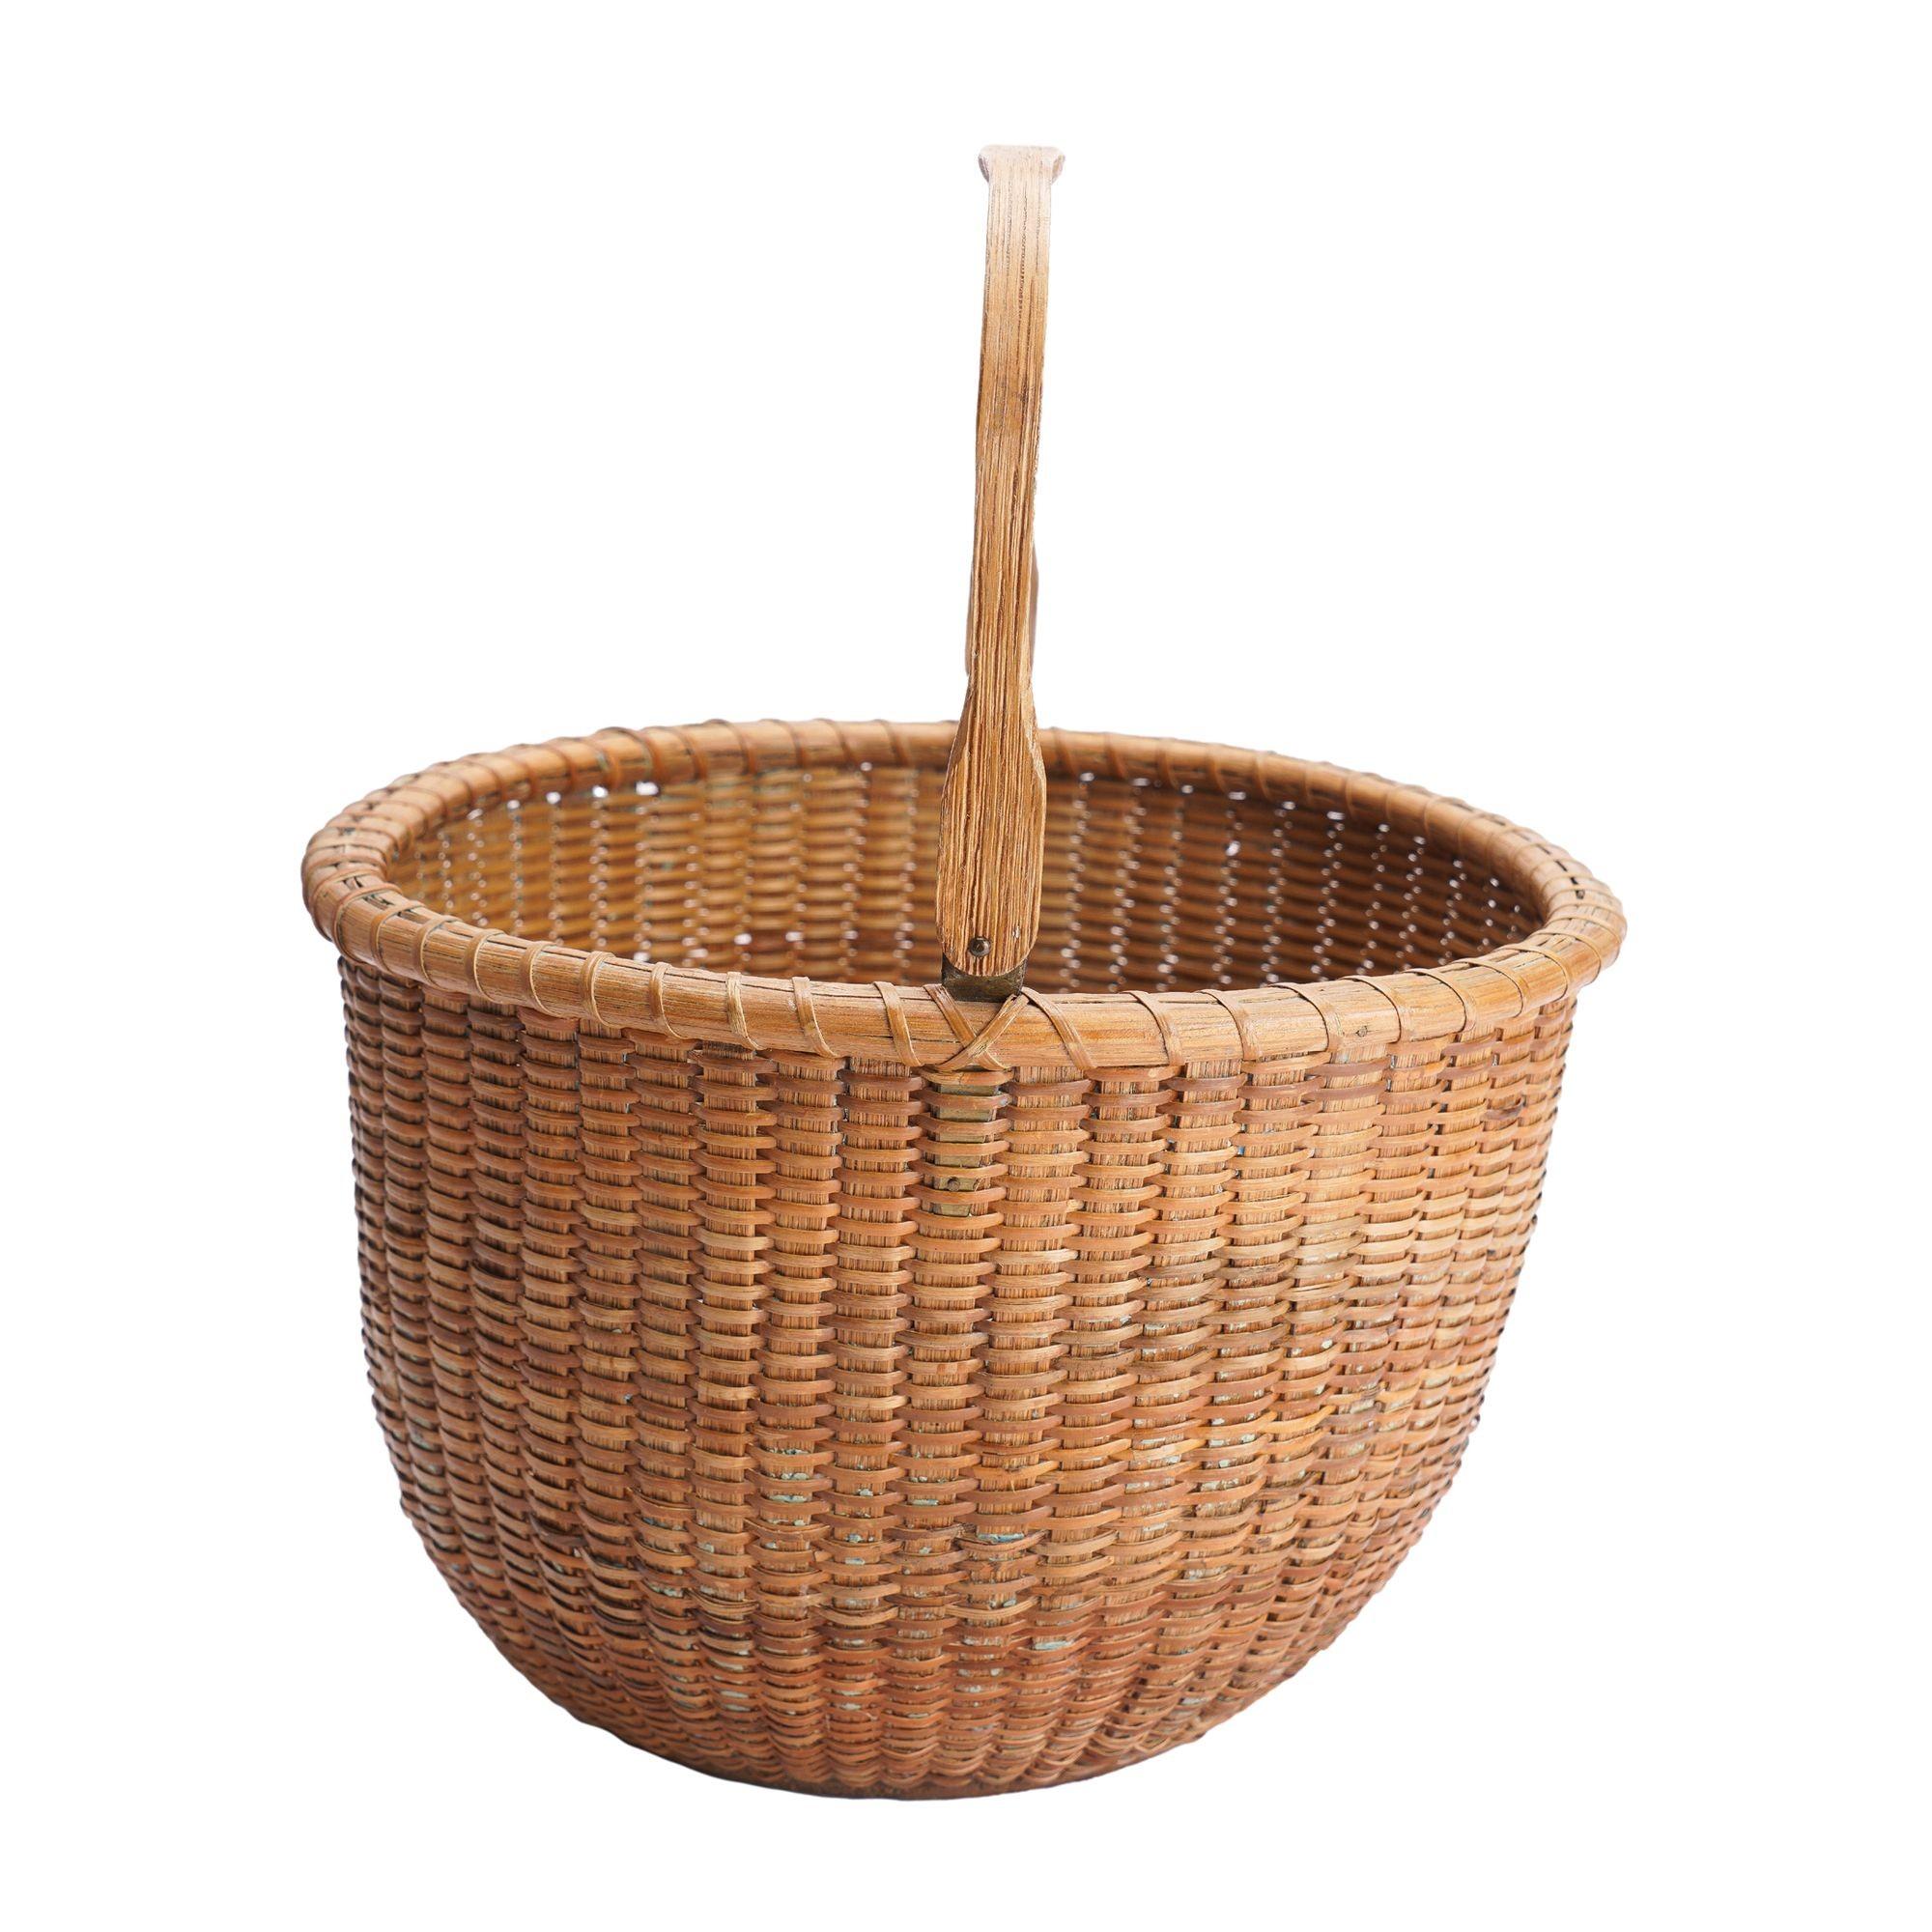 Nantucket lighthouse basket attributed to Mitchy Ray, 1900-50 For Sale 1